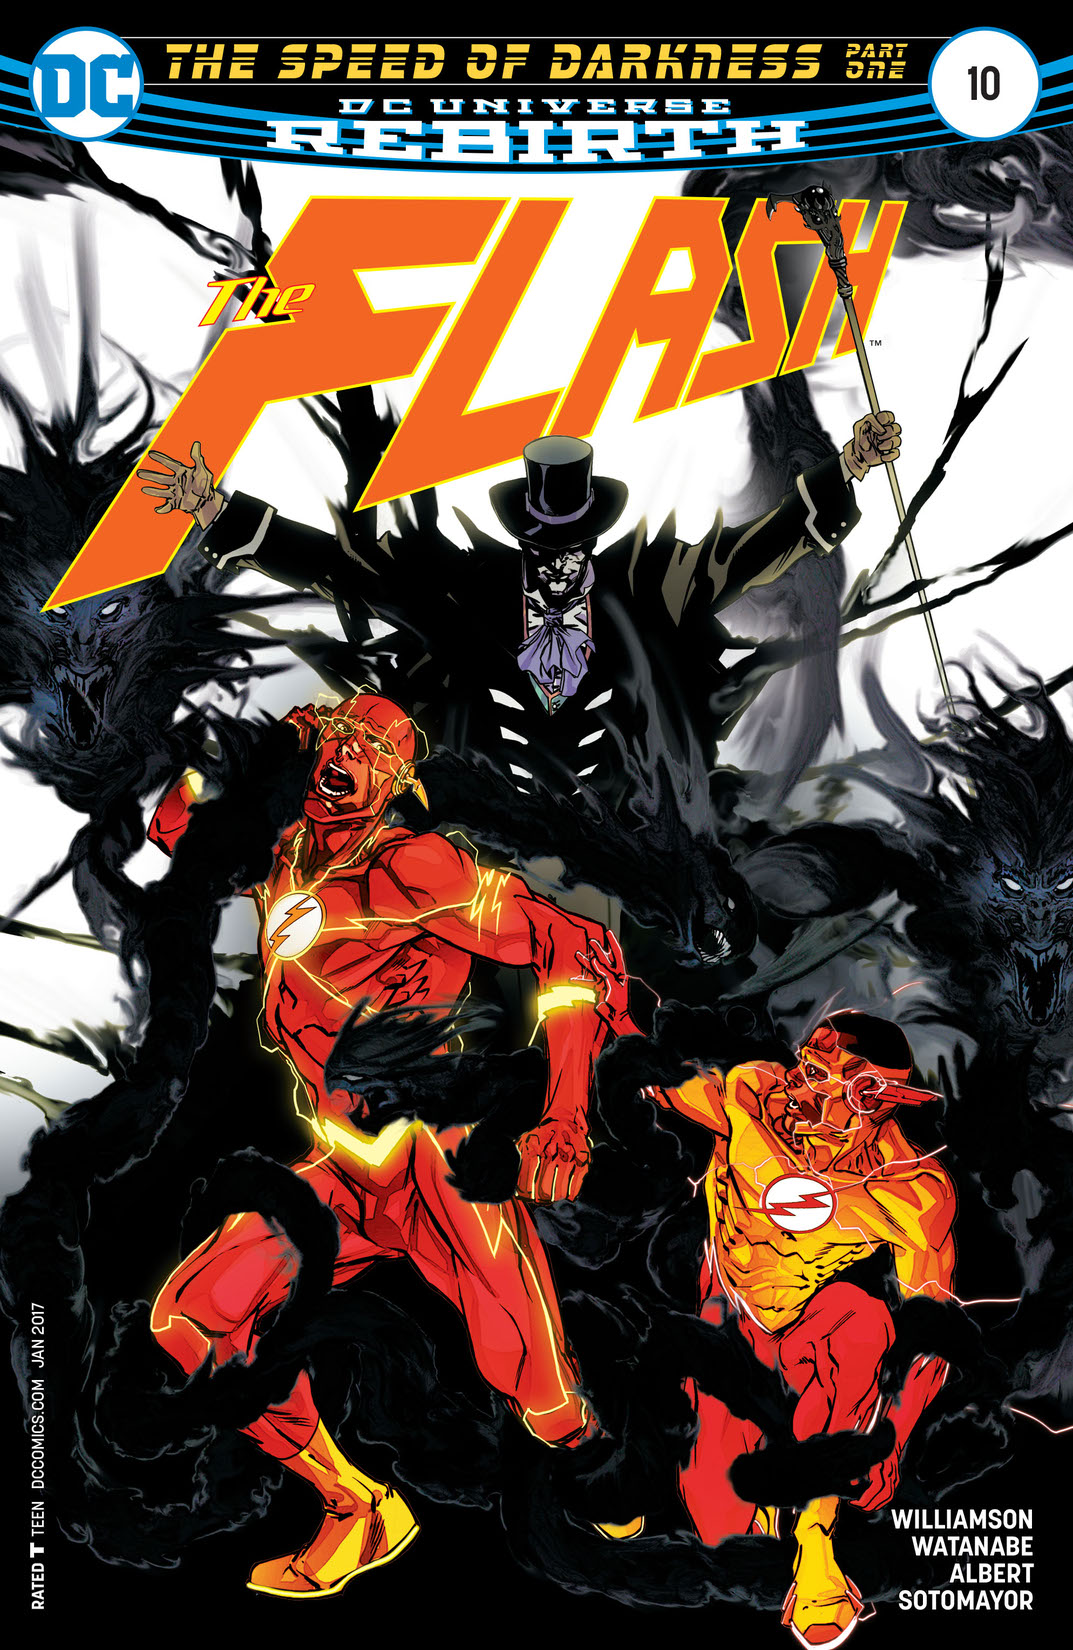 The Flash (2016-) #10 preview images